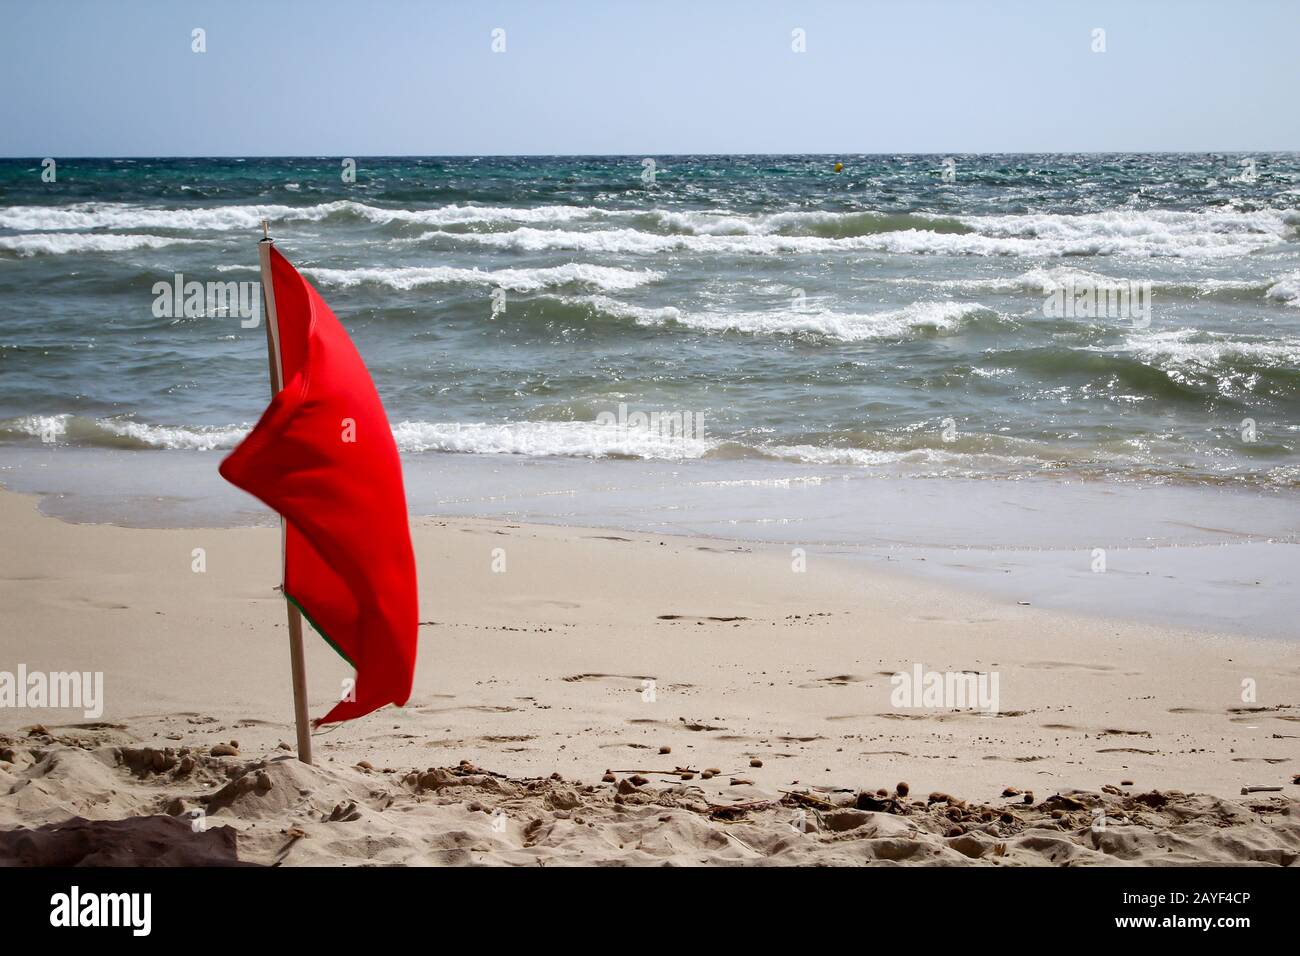 Flags on the beach indicate dangers like jellyfish, undercurrent and other dangers Stock Photo